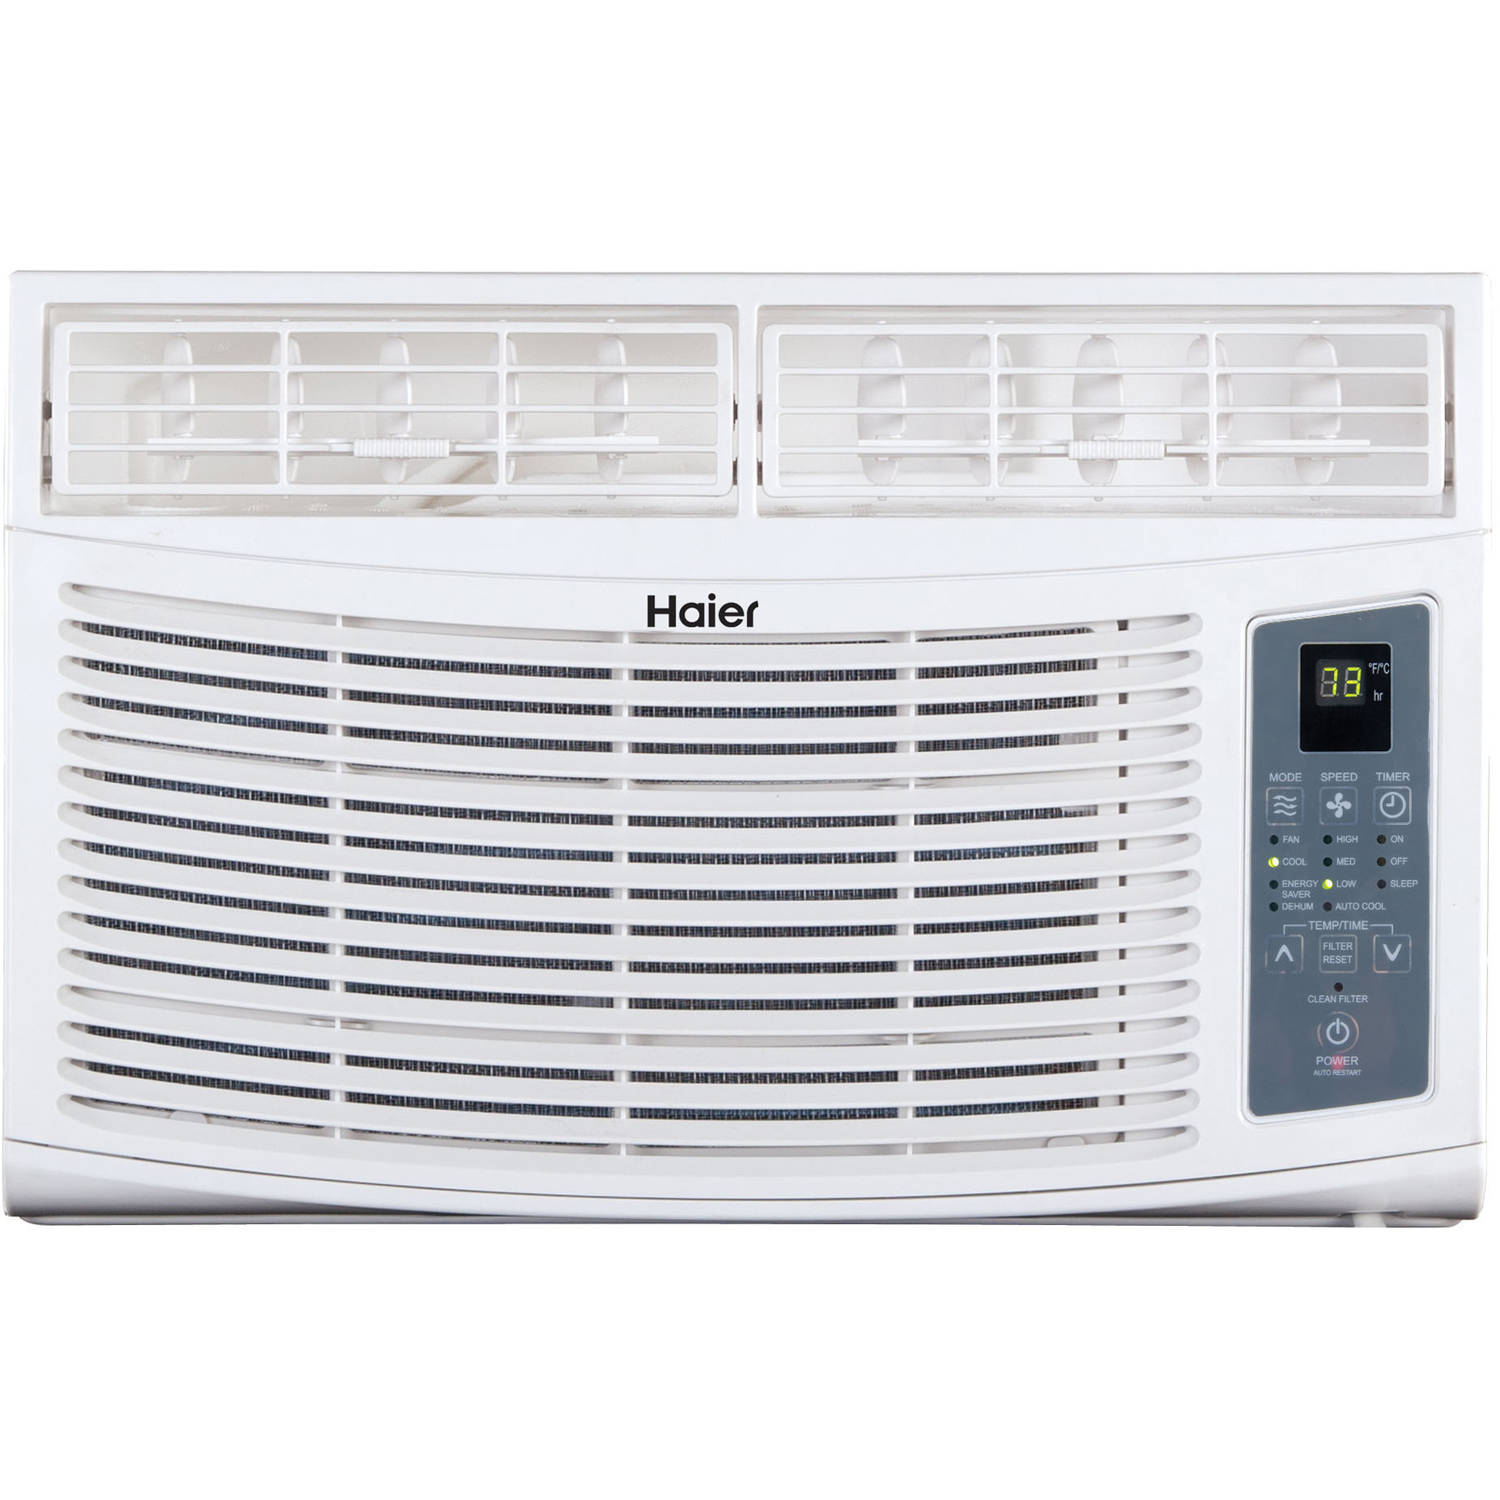 Haier 8,000 BTUs Air Conditioner, White, HWE08XCR-L - image 1 of 8